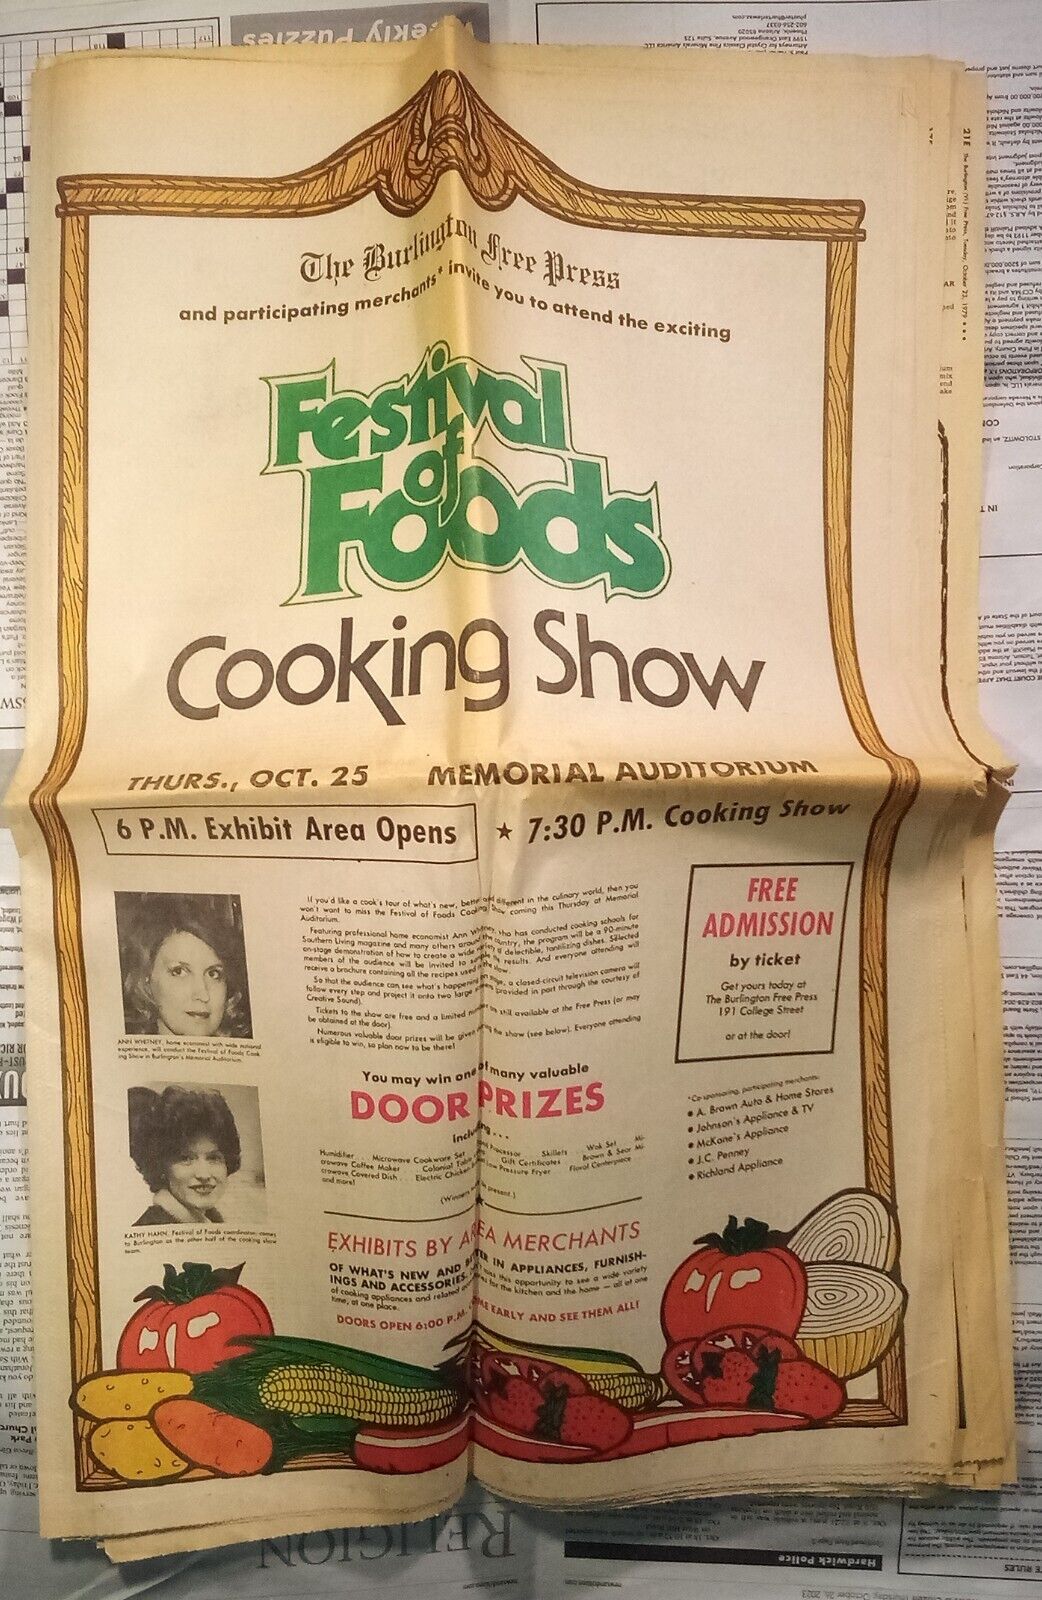 1979 Burlington Free Press Festival of Foods Cooking Show Newspaper Sections